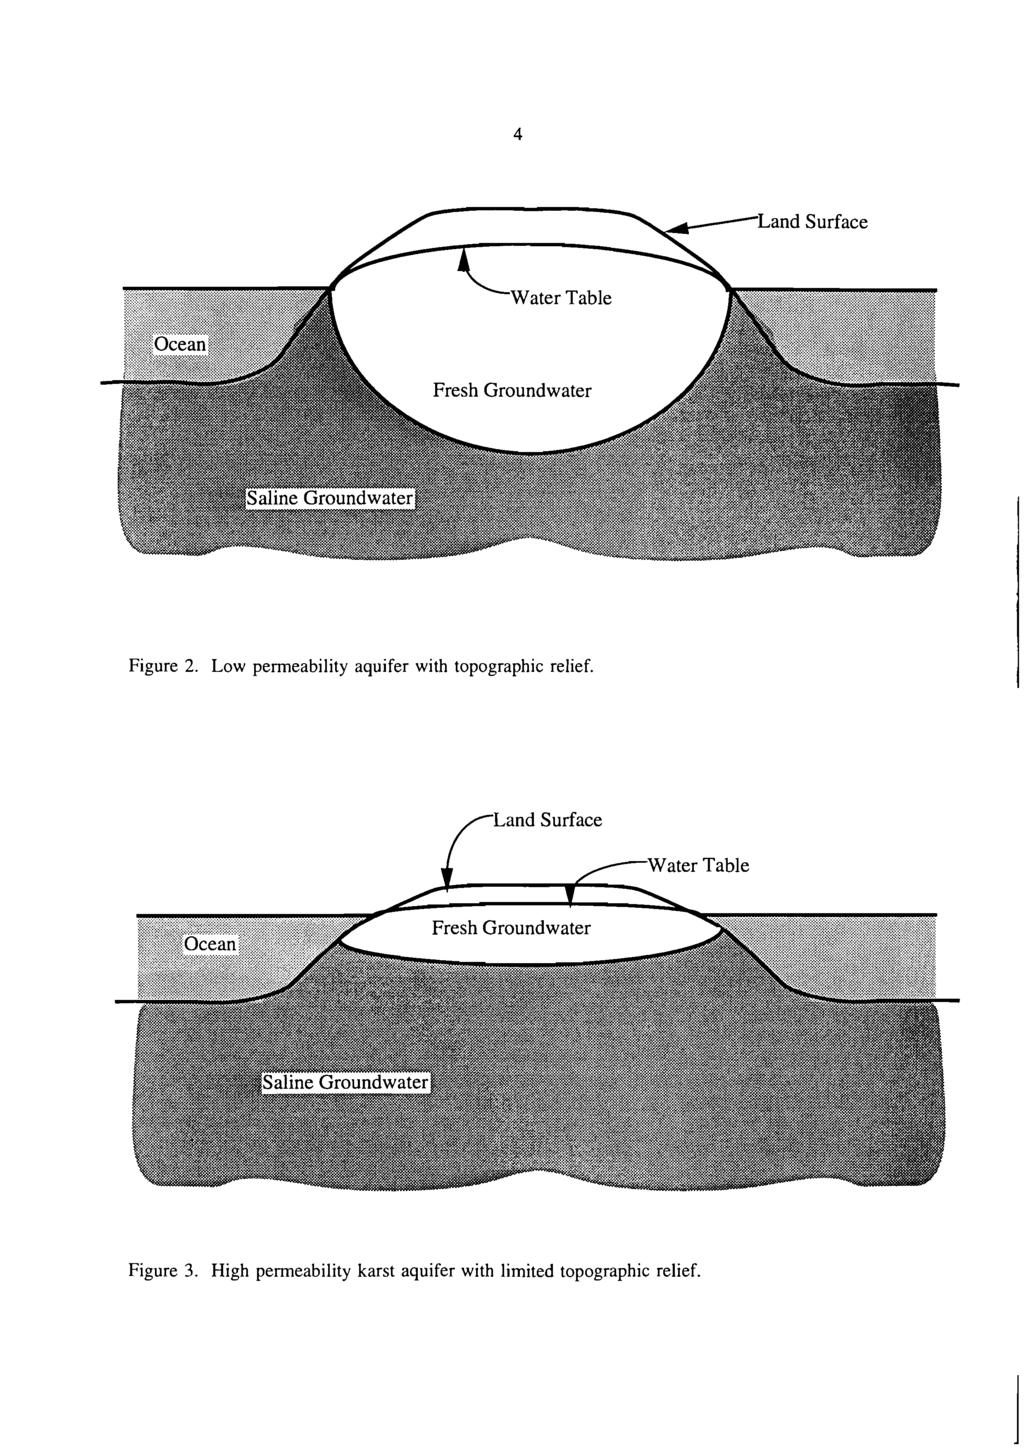 s Land Surface Figure 2. Low permeability aquifer with topographic relief.